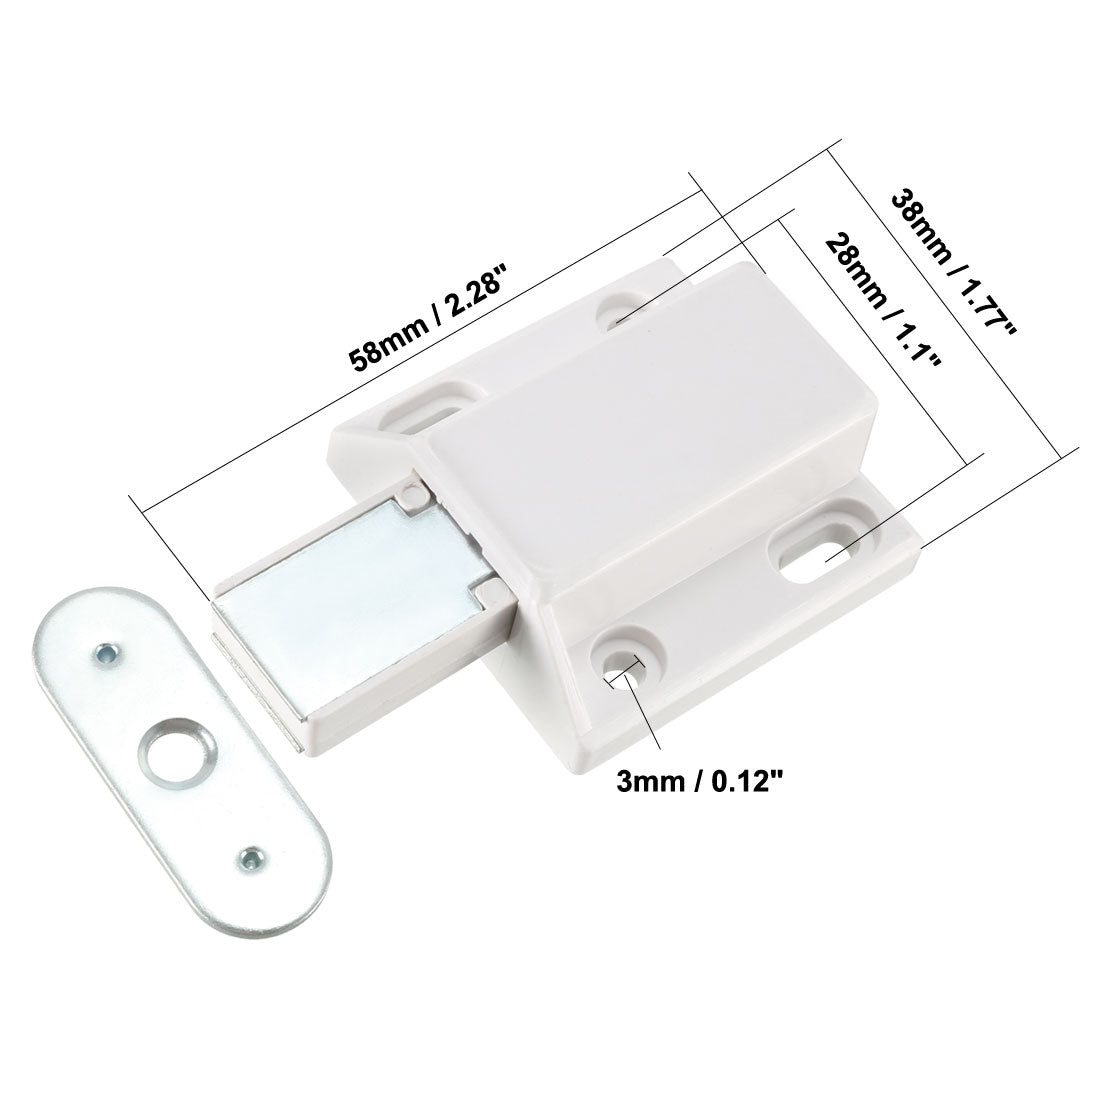 uxcell Uxcell 8-10mm Glass Door Magnetic Touch Catch Latch Closure Plastic White with Clamp 2 Set